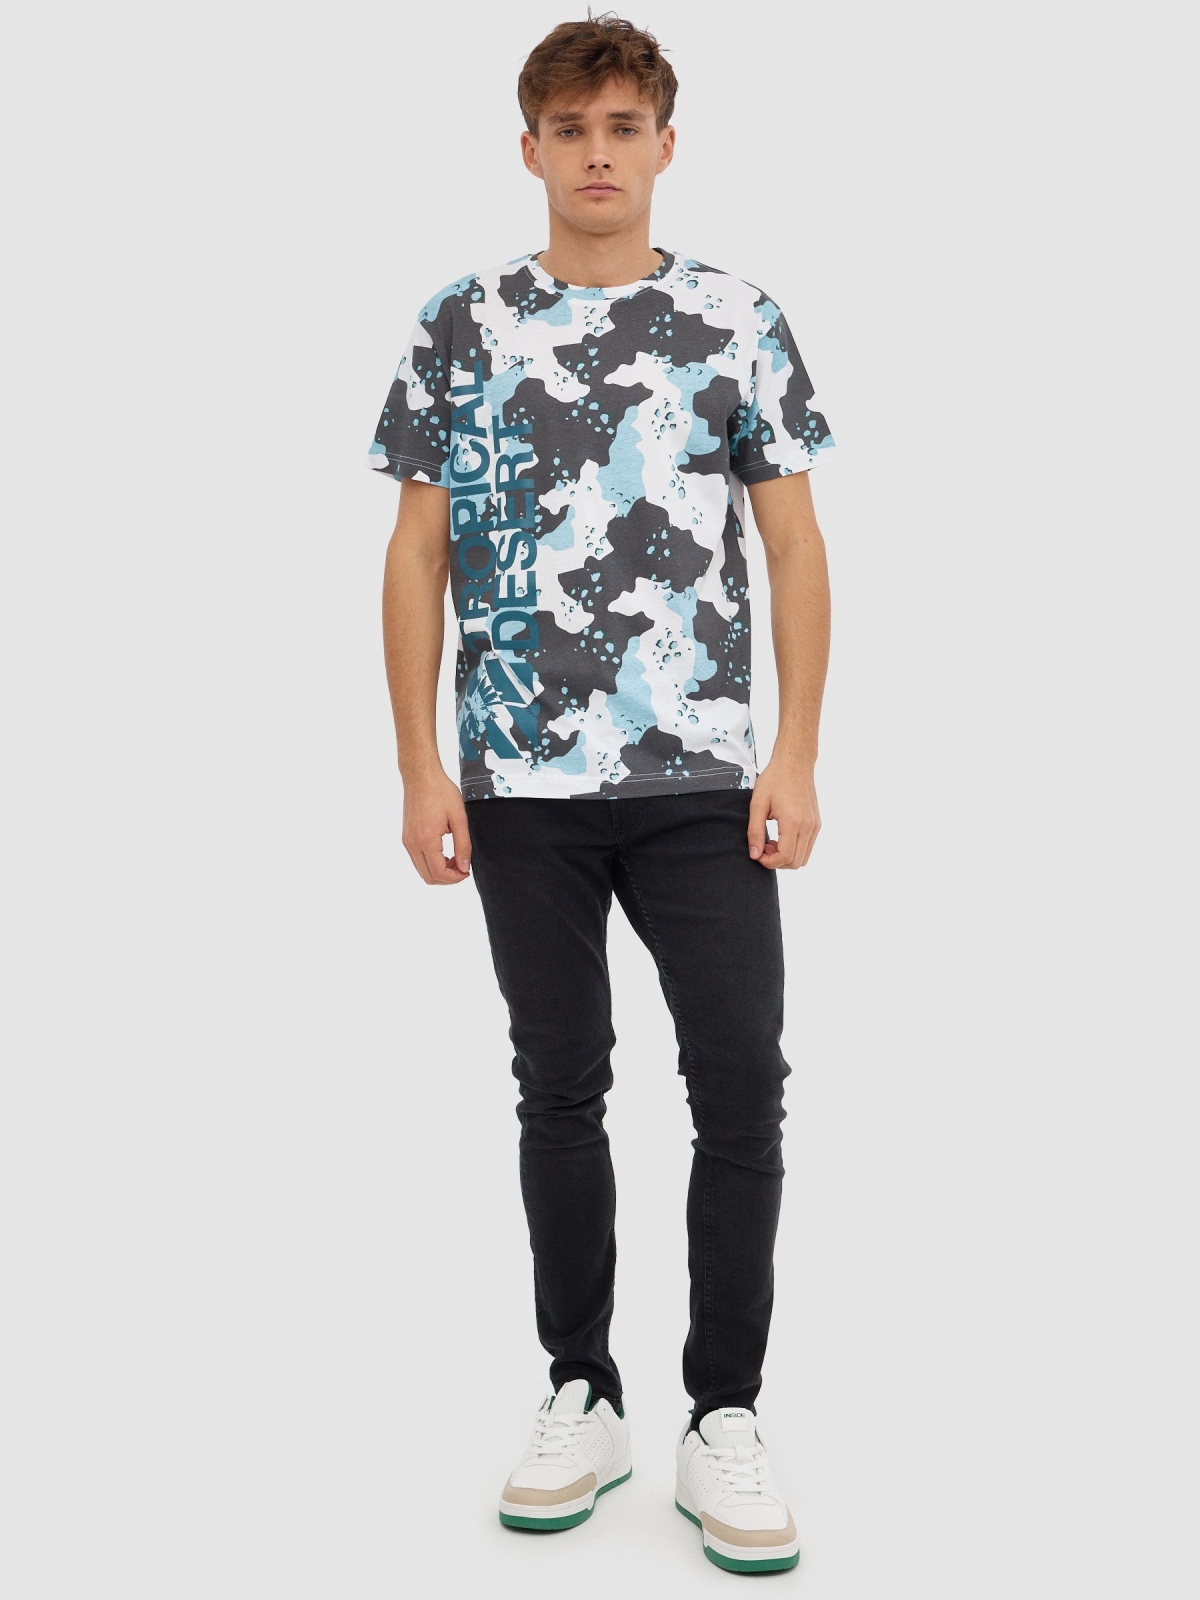 Tropical camouflage t-shirt white front view